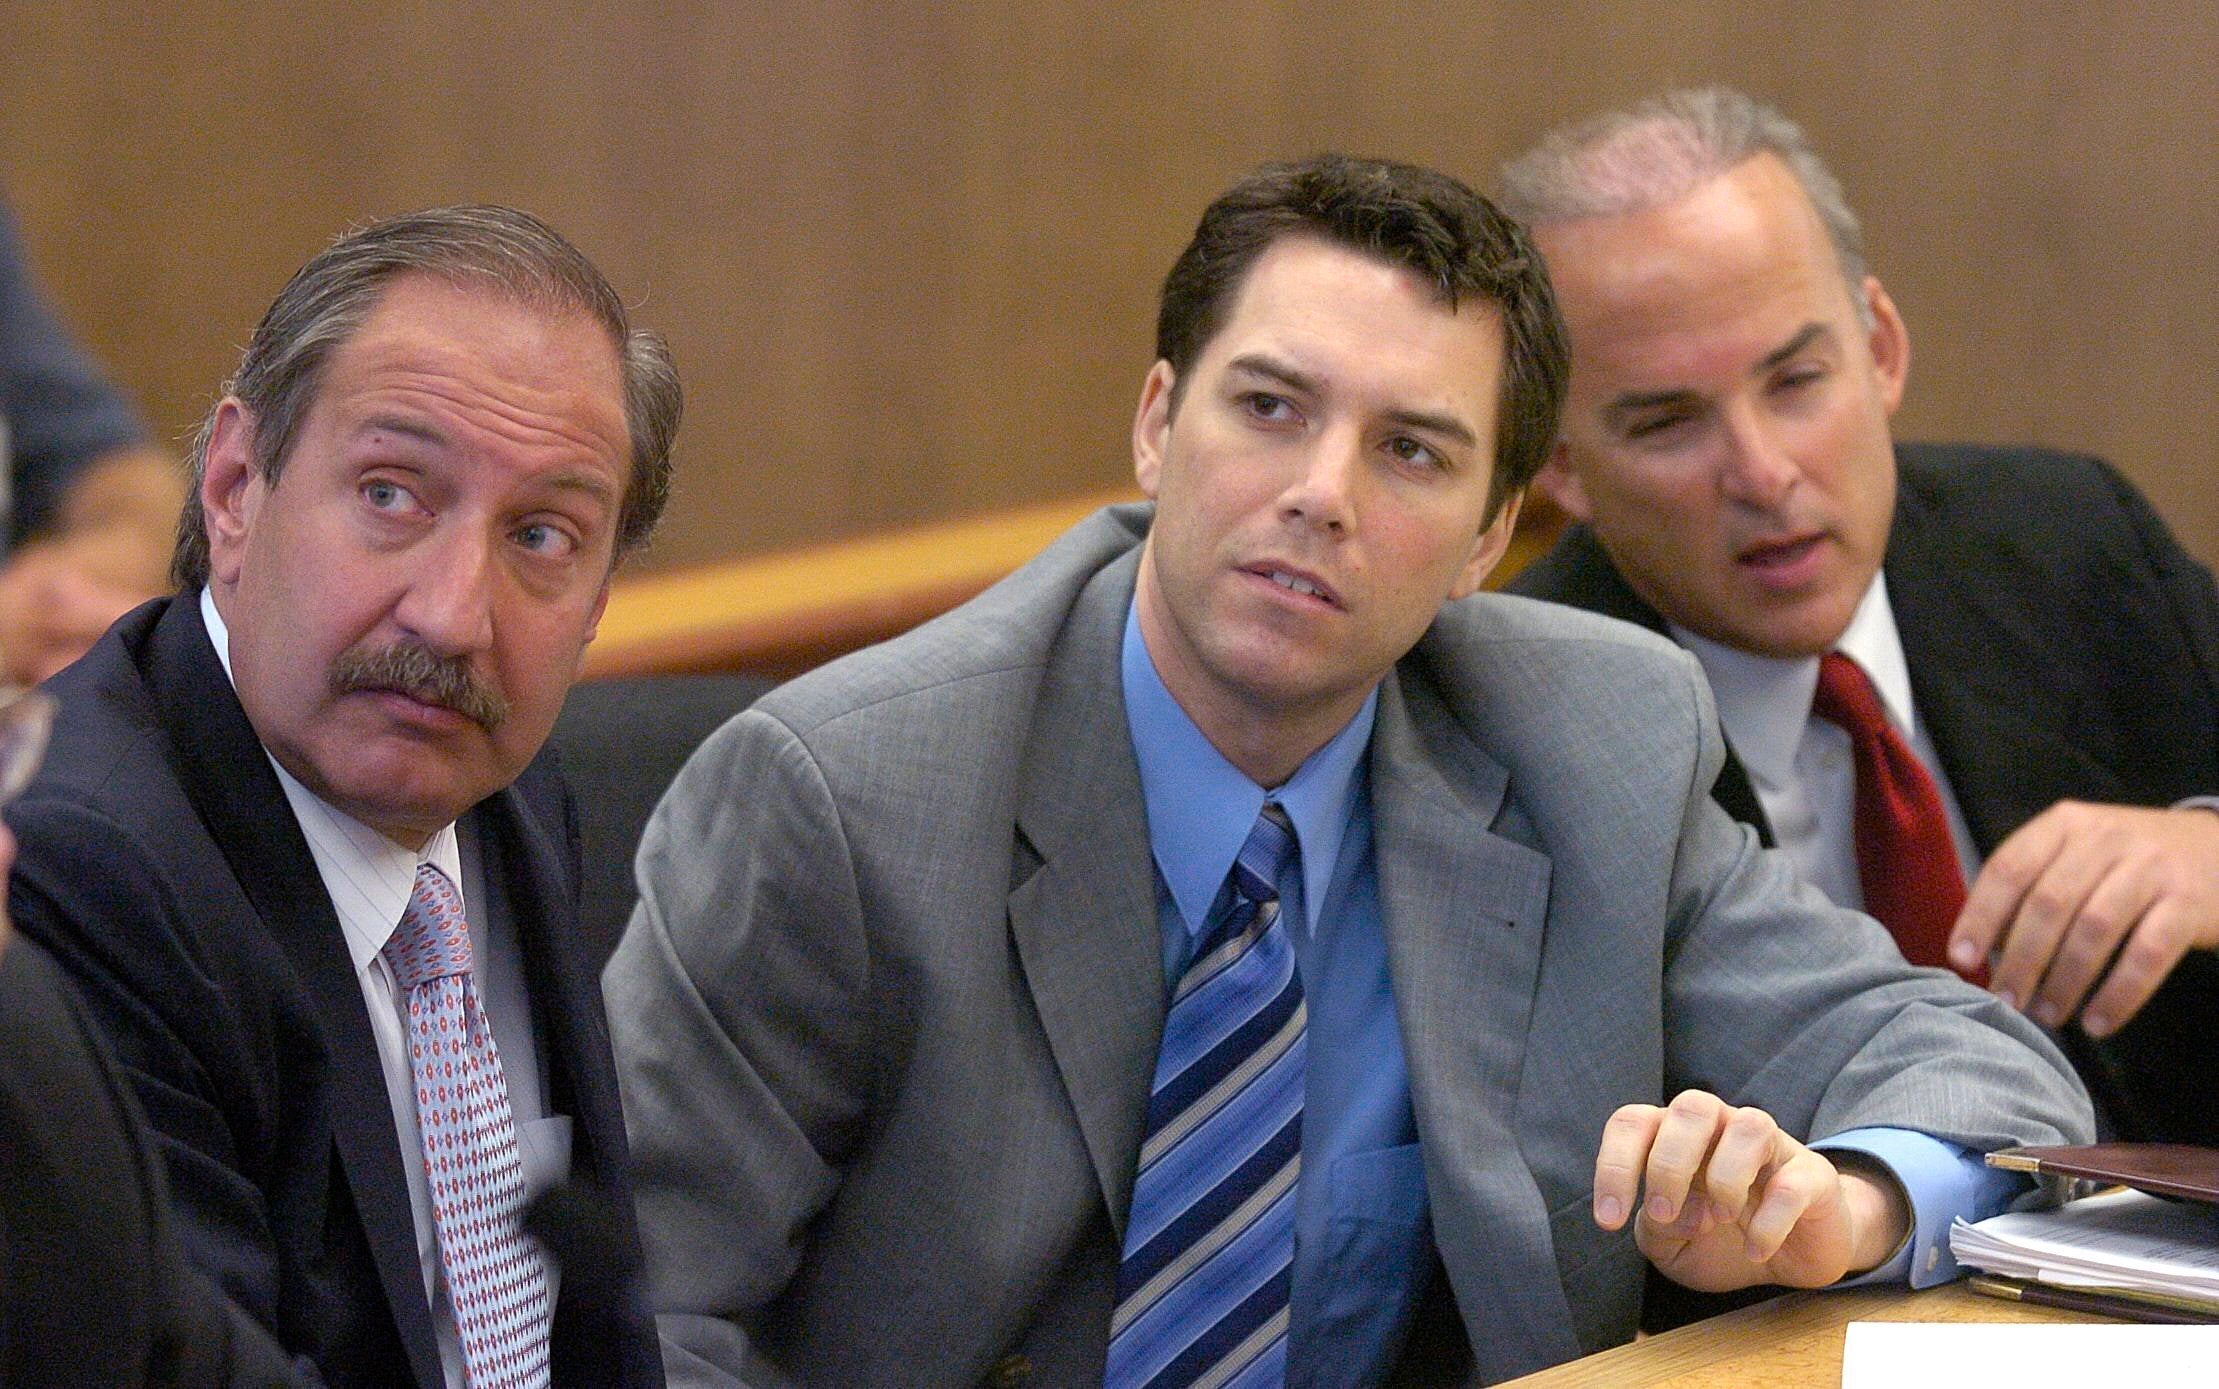 Scott Peterson during his 2004 trial